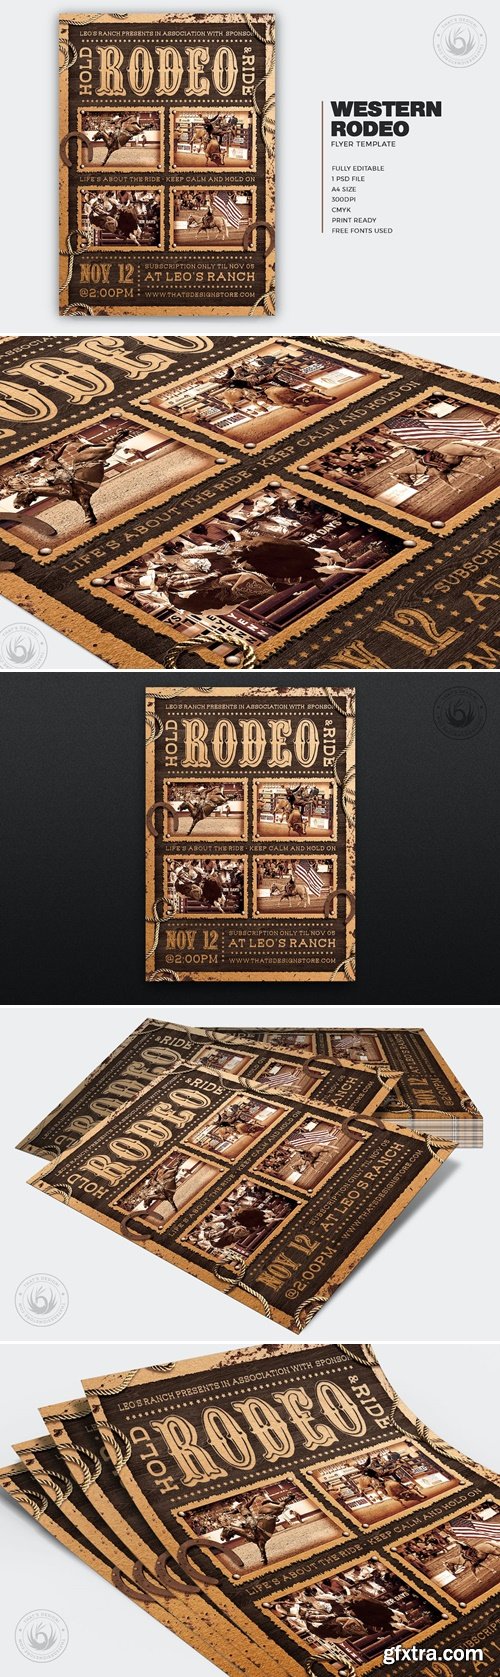 Western Rodeo Flyer Template V4 6CAWU99